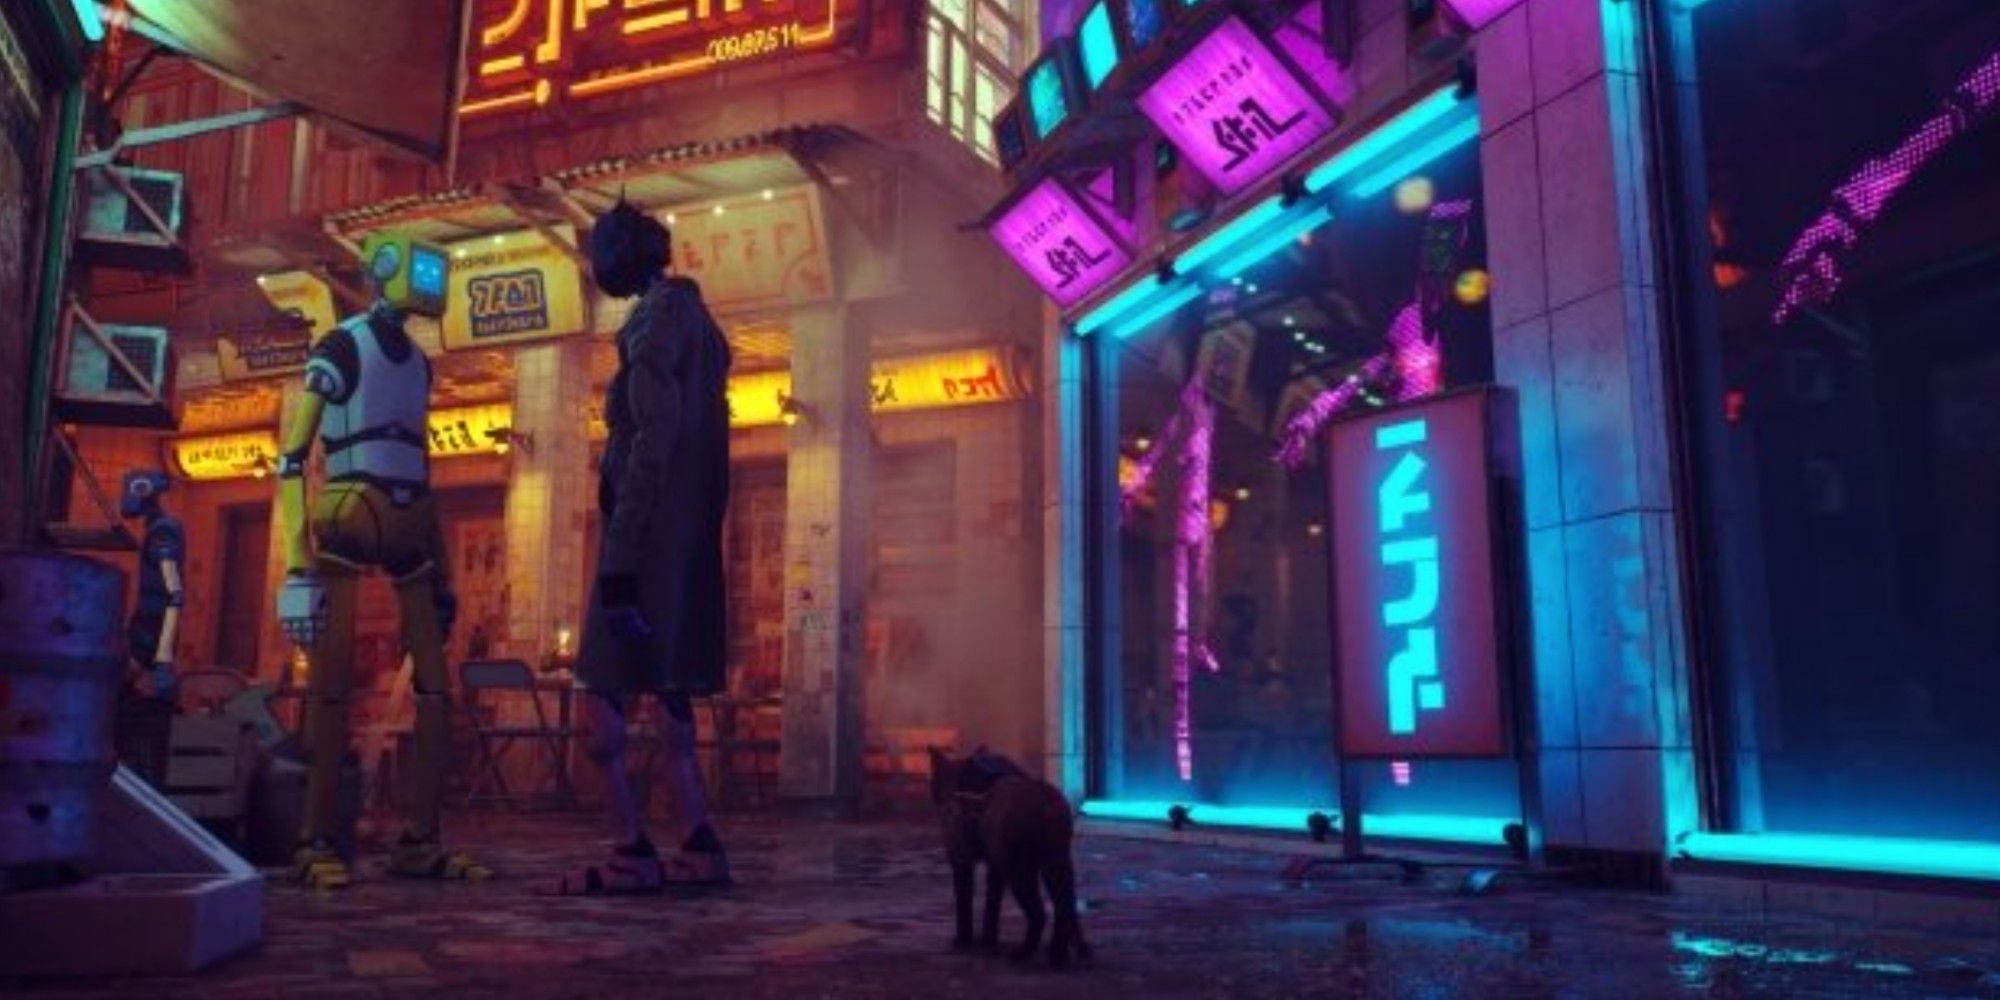 Stray Cat Video Game Gets Movie From Annapurna